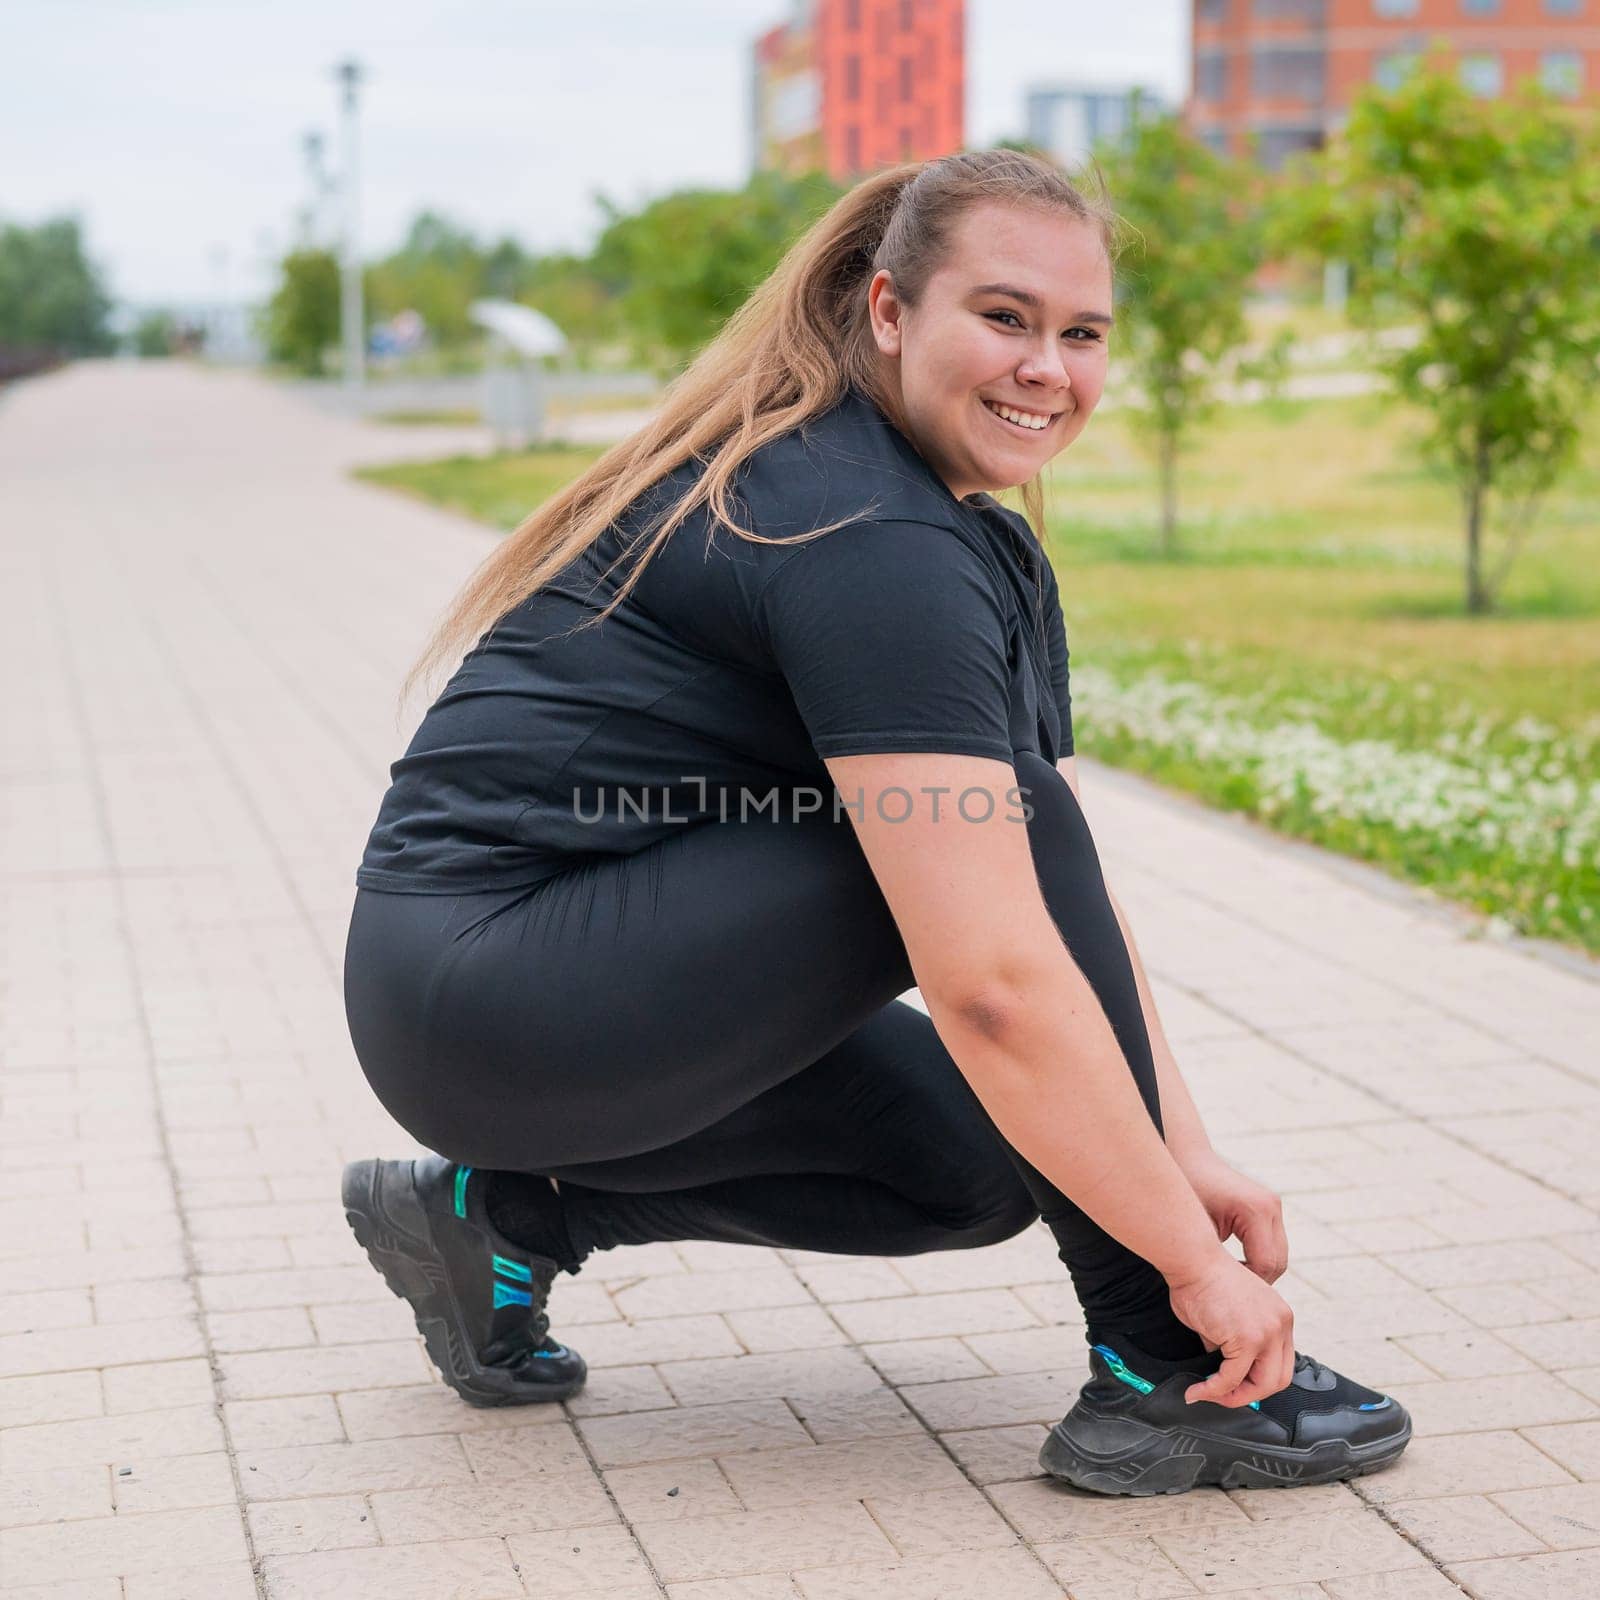 A fat woman in a tracksuit crouches down and ties her shoelaces outdoors